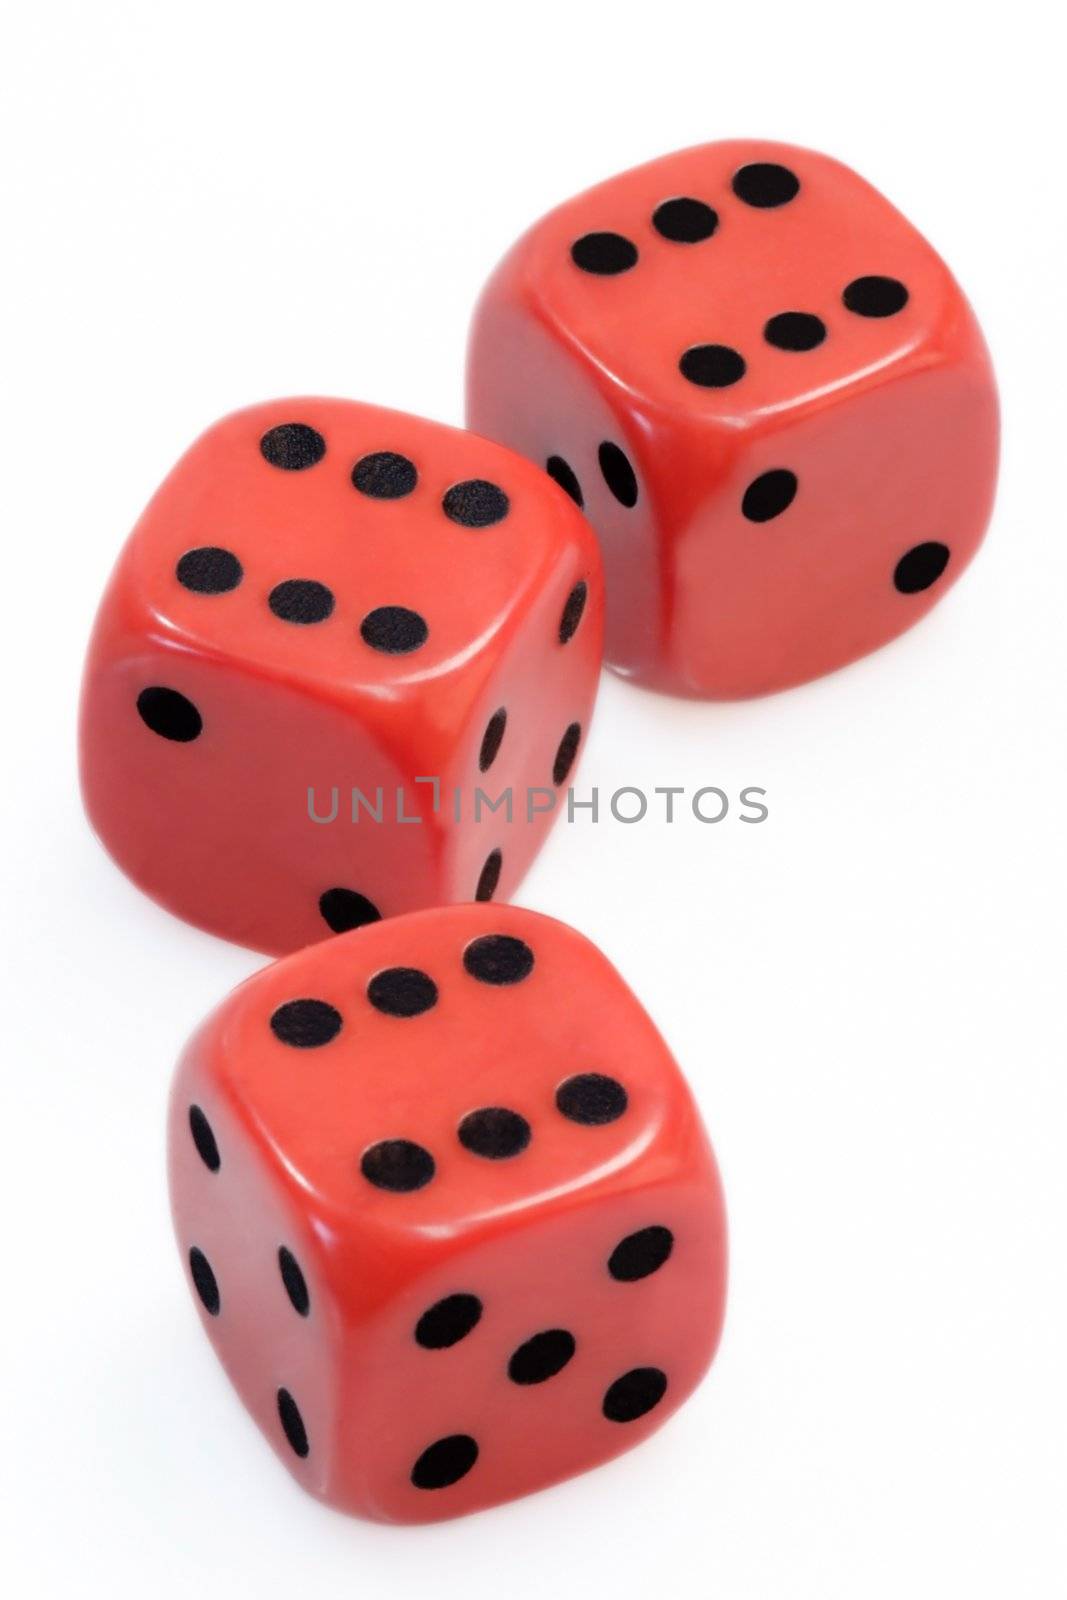 Three red dices over white background